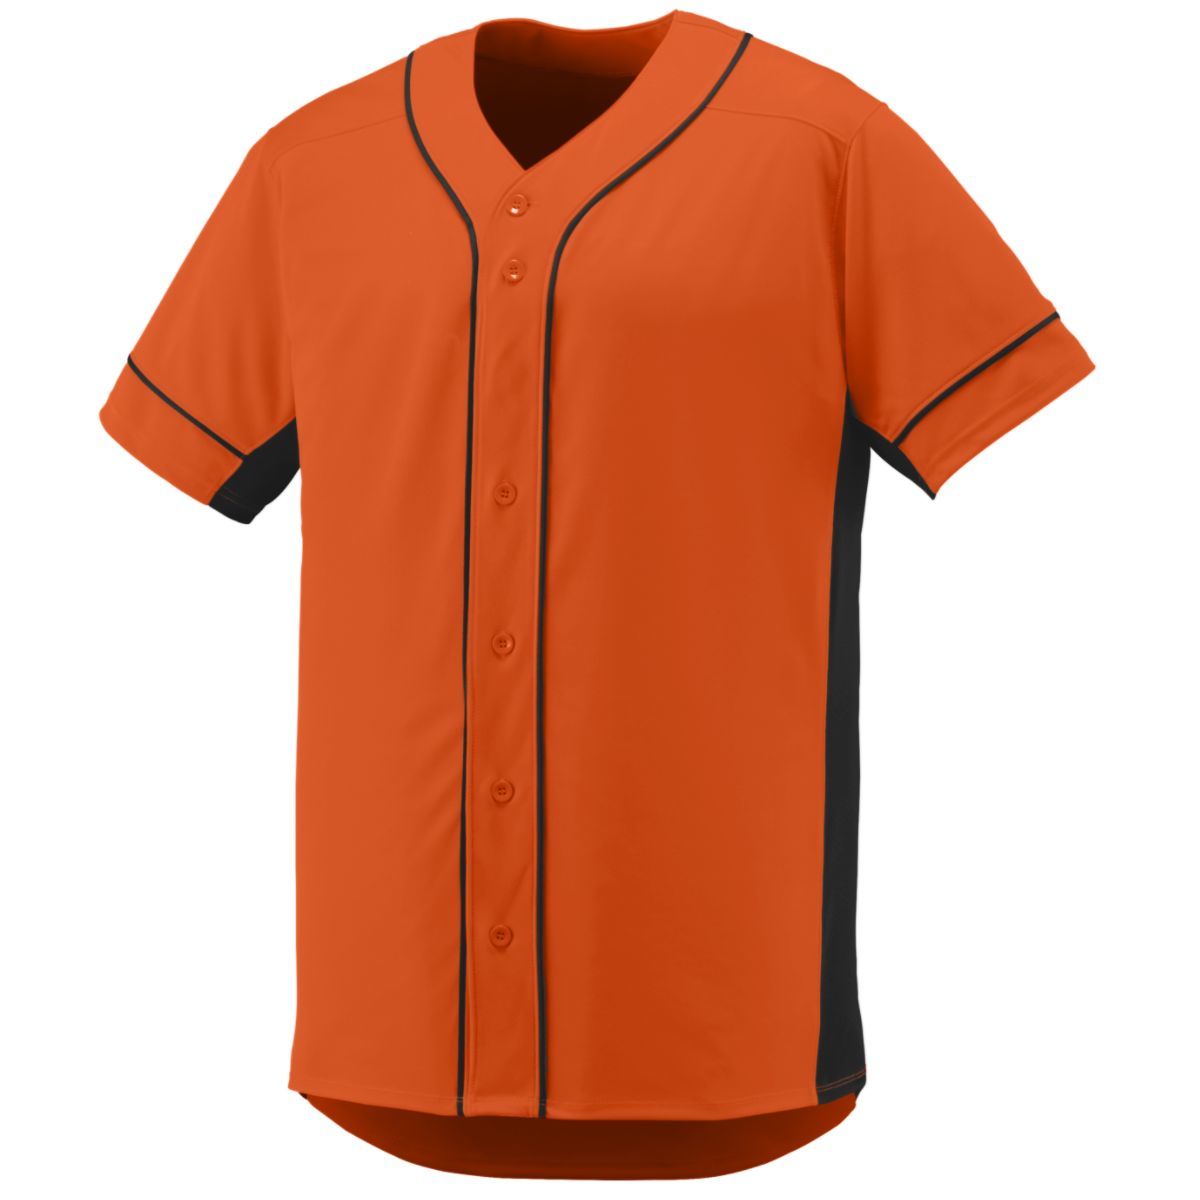 Augusta Sportswear Slugger Jersey in Orange/Black  -Part of the Adult, Adult-Jersey, Augusta-Products, Baseball, Shirts, All-Sports, All-Sports-1 product lines at KanaleyCreations.com